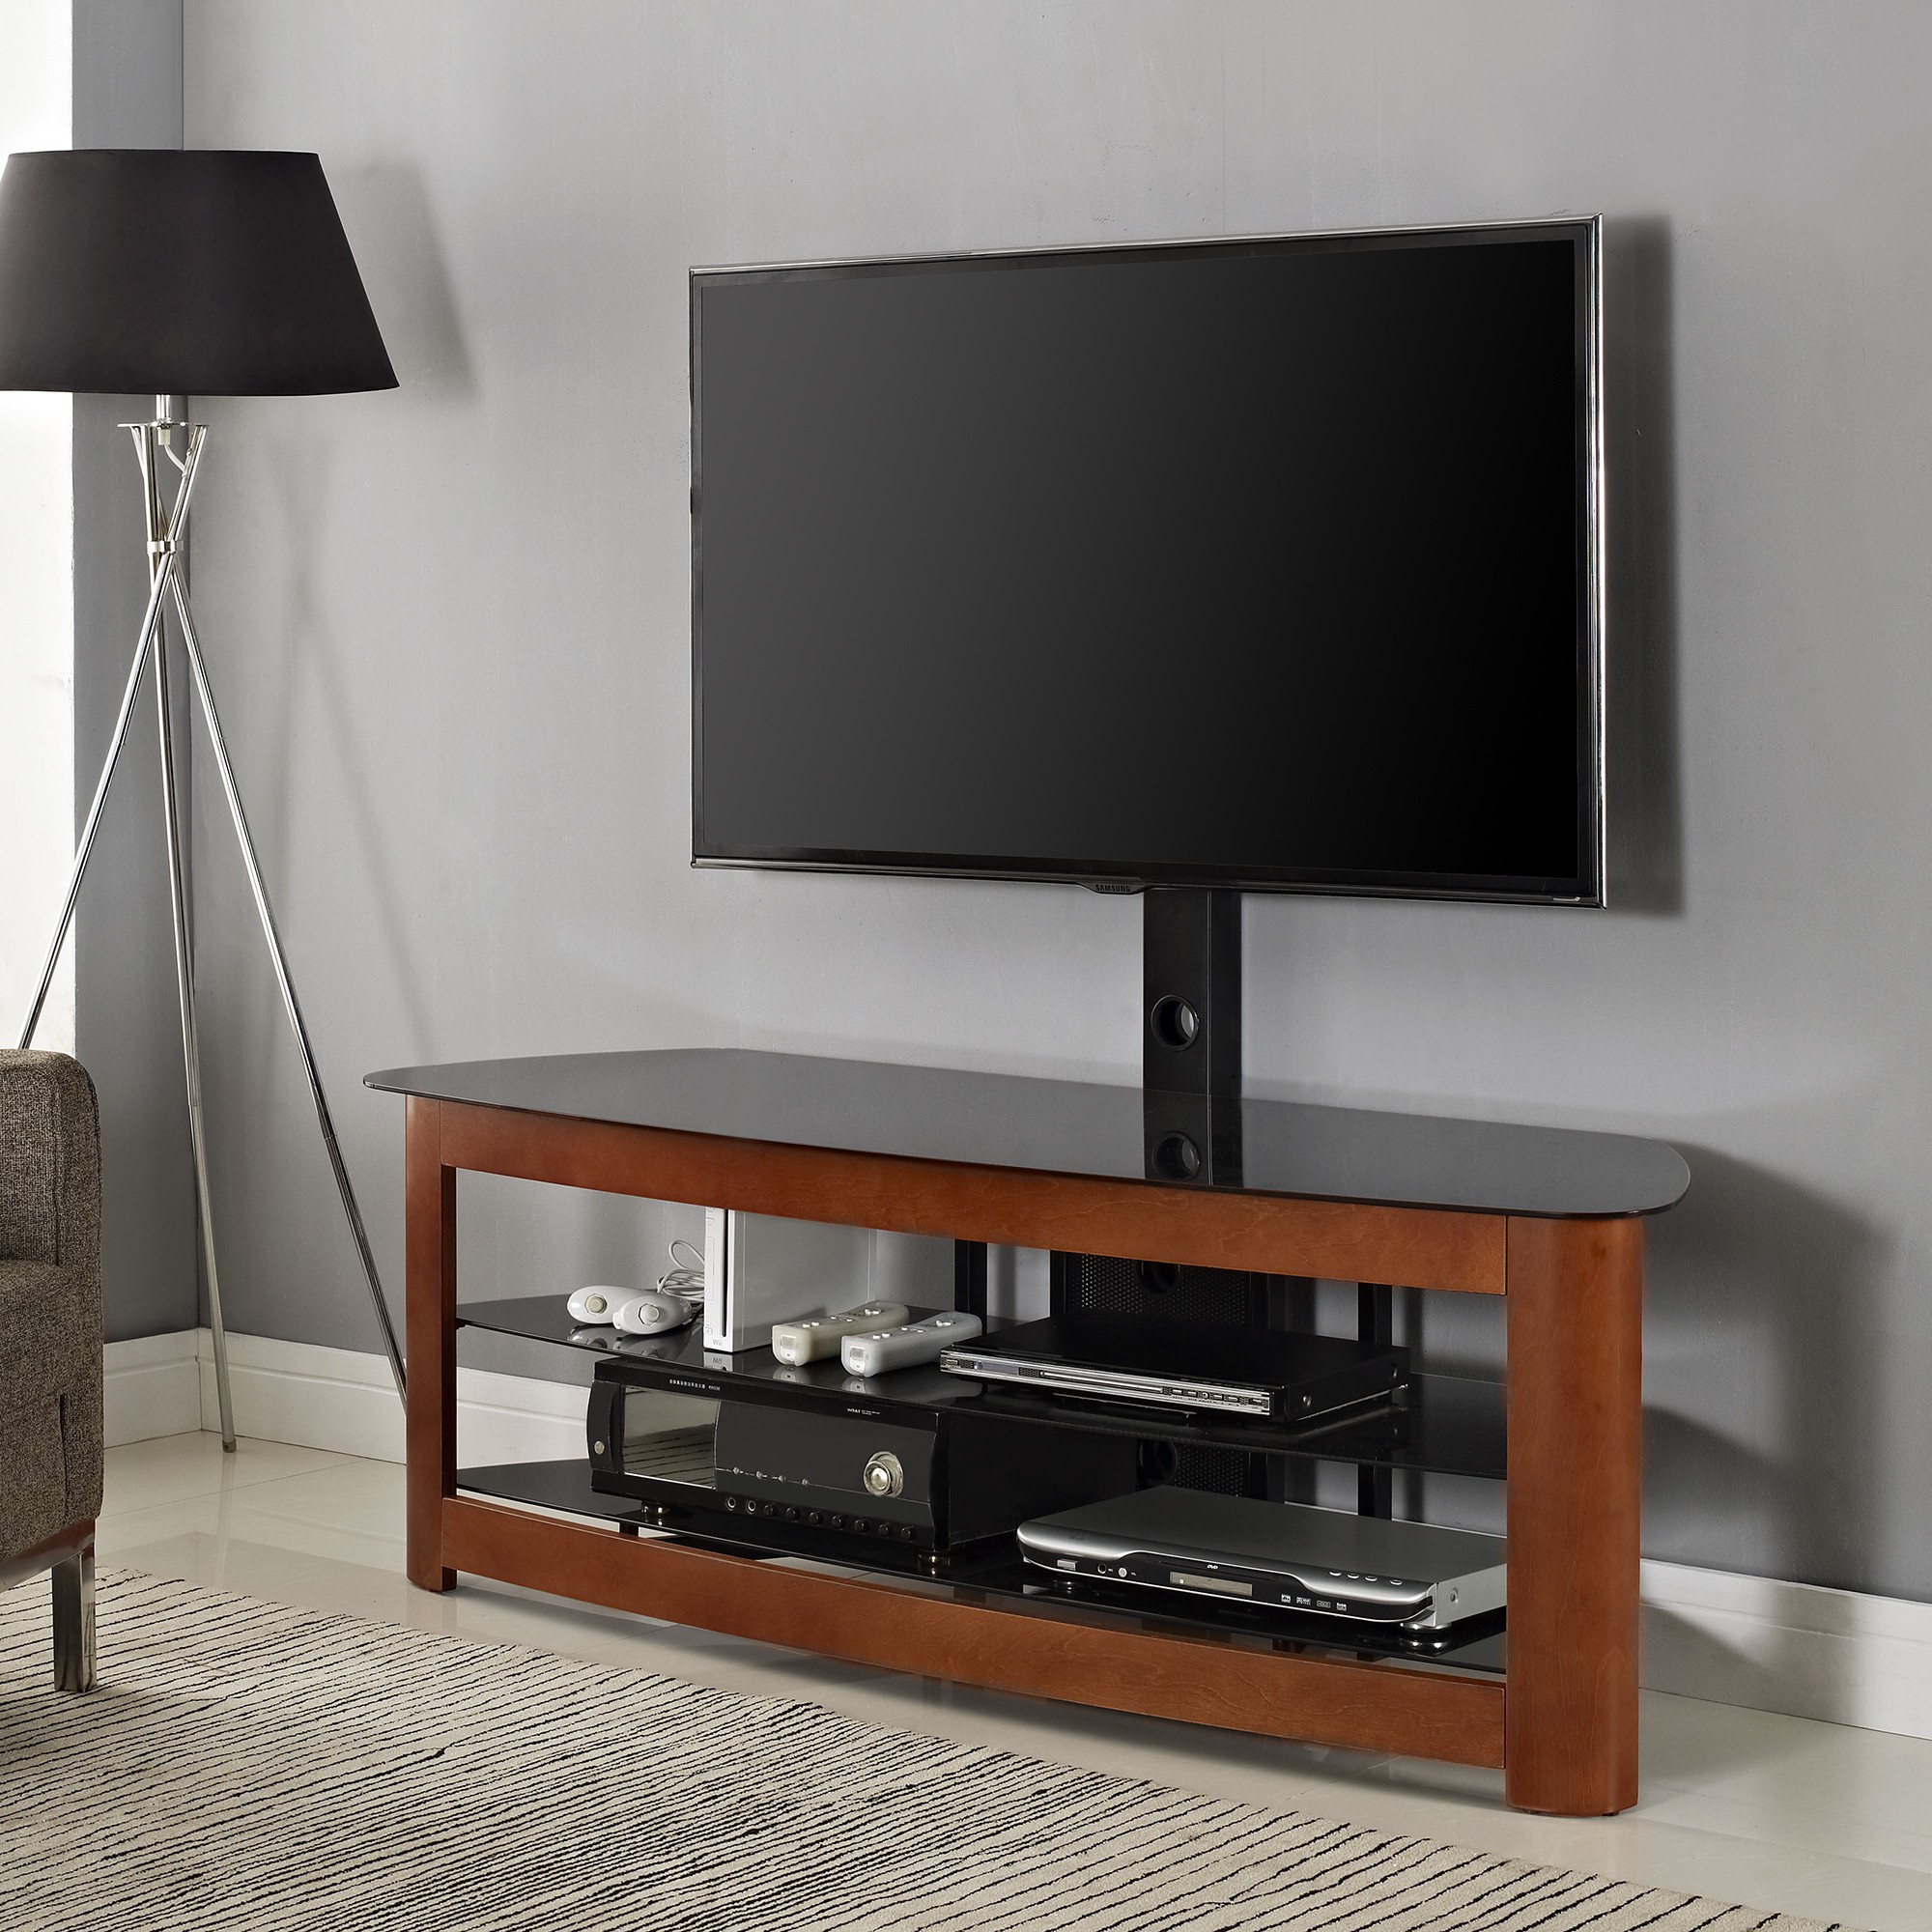 Walker edison 65 inch tv stand with integrated mount cherry